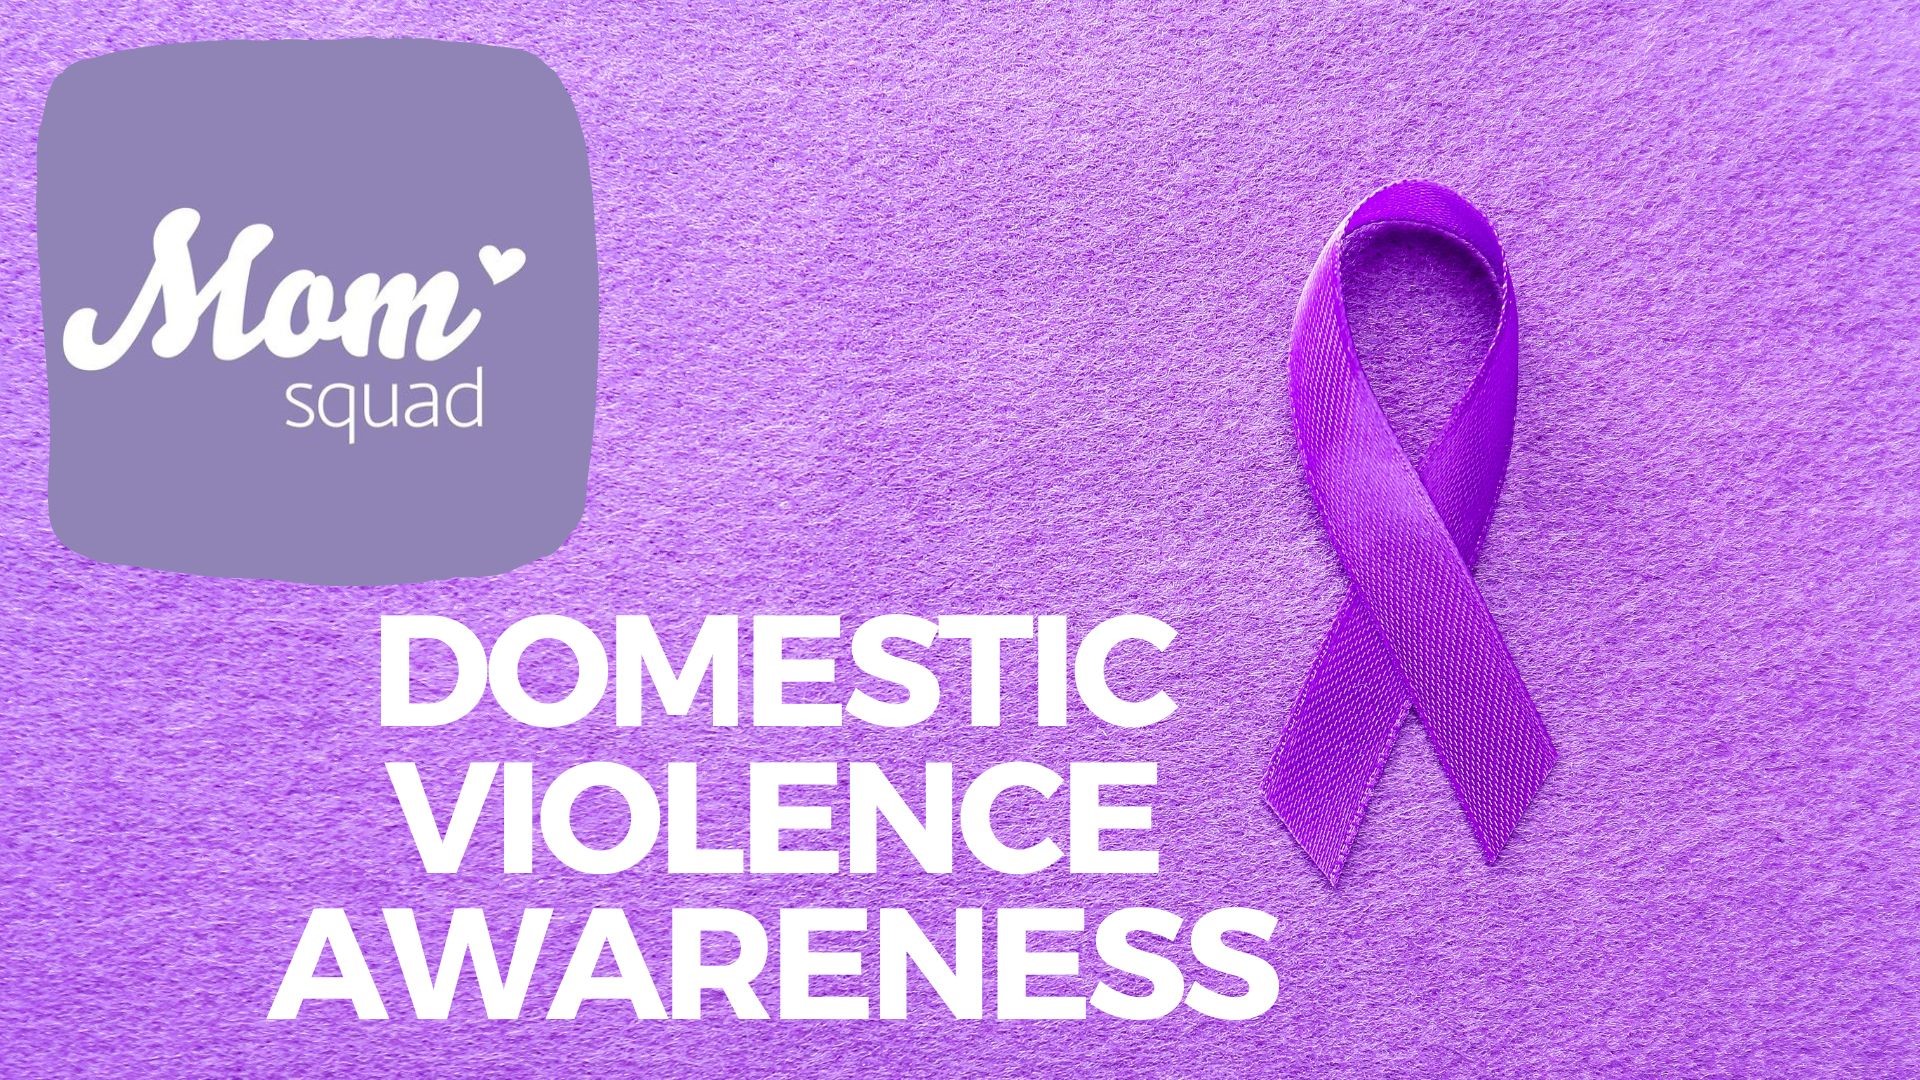 WKYC's Maureen Kyle discusses domestic abuse with talk show host Tamron Hall. She also talks with an advocate about signs to look for, and how to help.